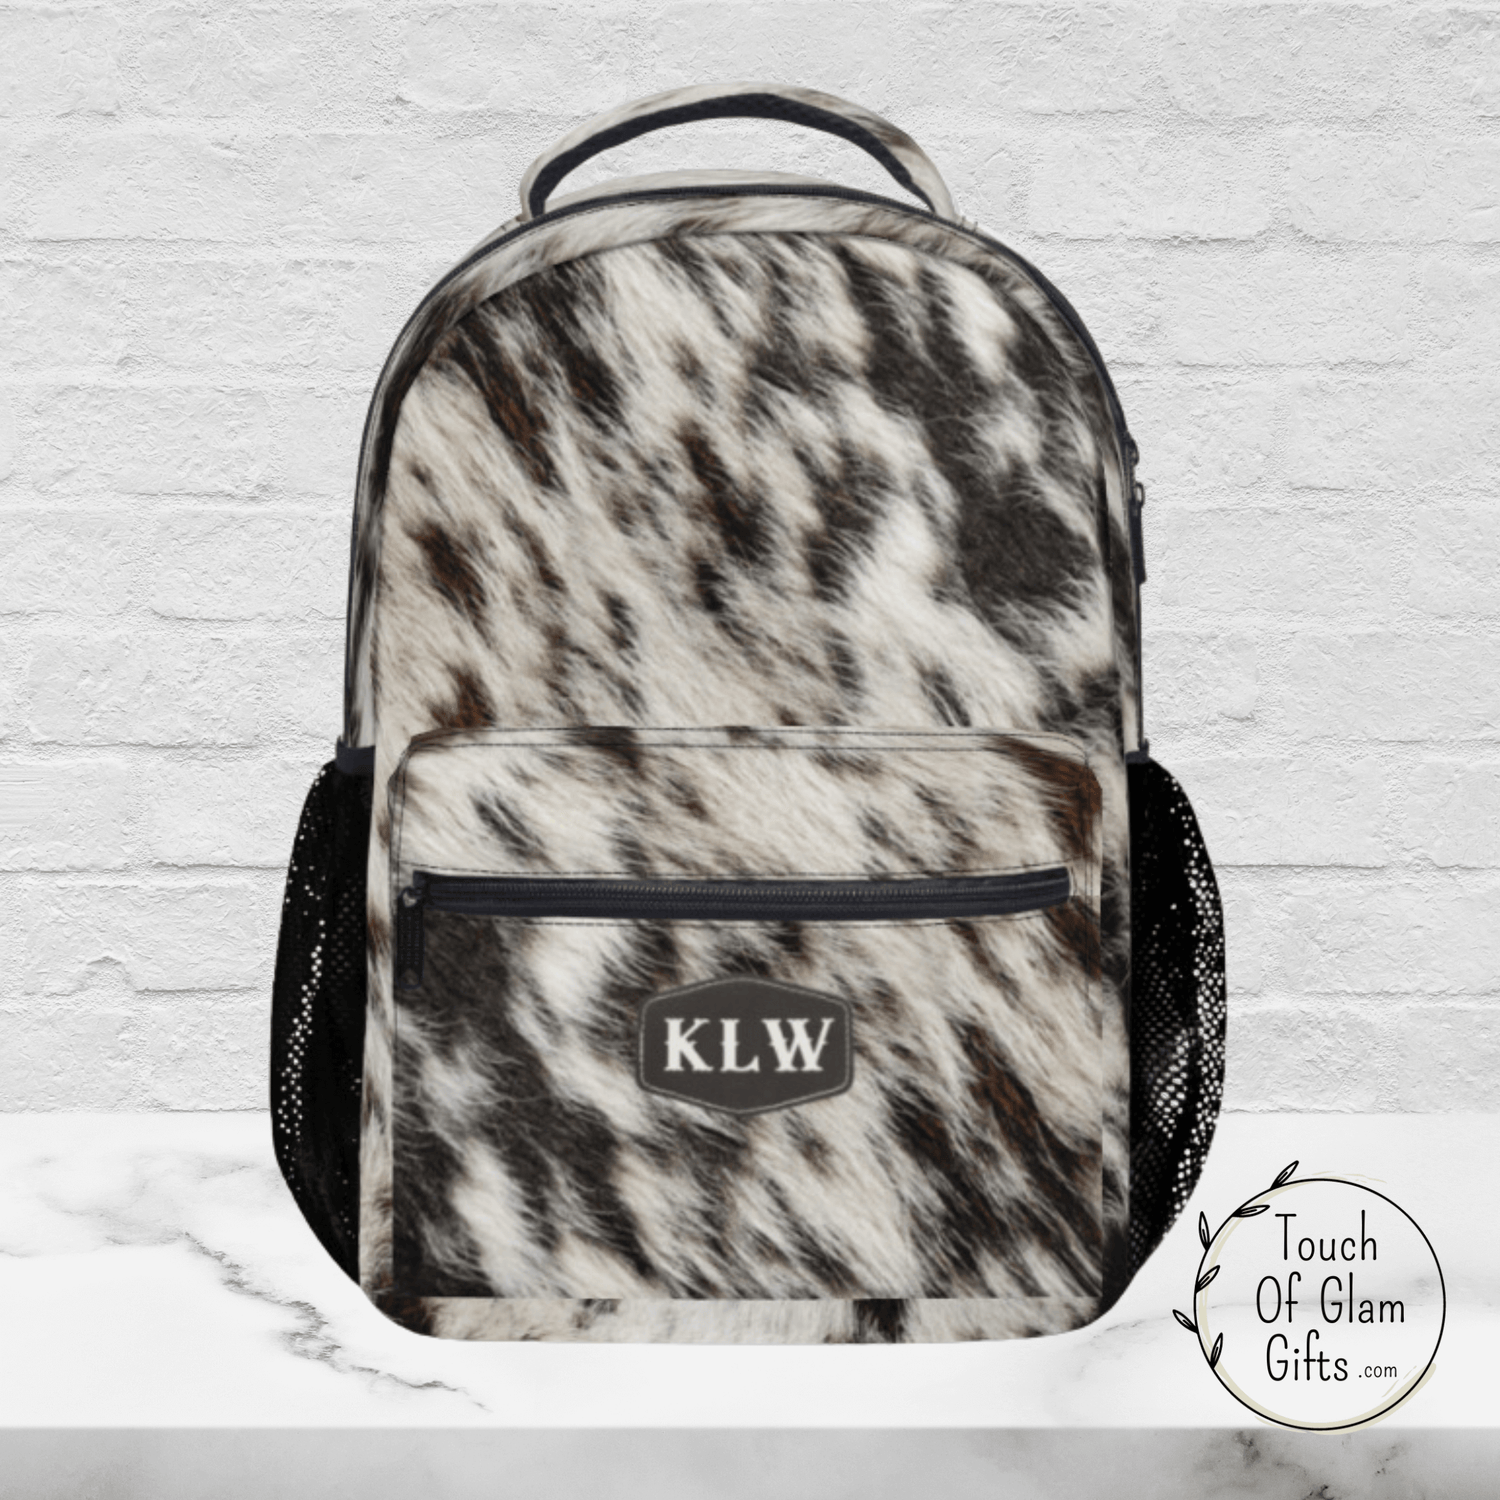 Our cowhide print backpack can be monogrammed or enjoyed plain. This brown and tan cowhide is a print on canvas to look like real cowhide.